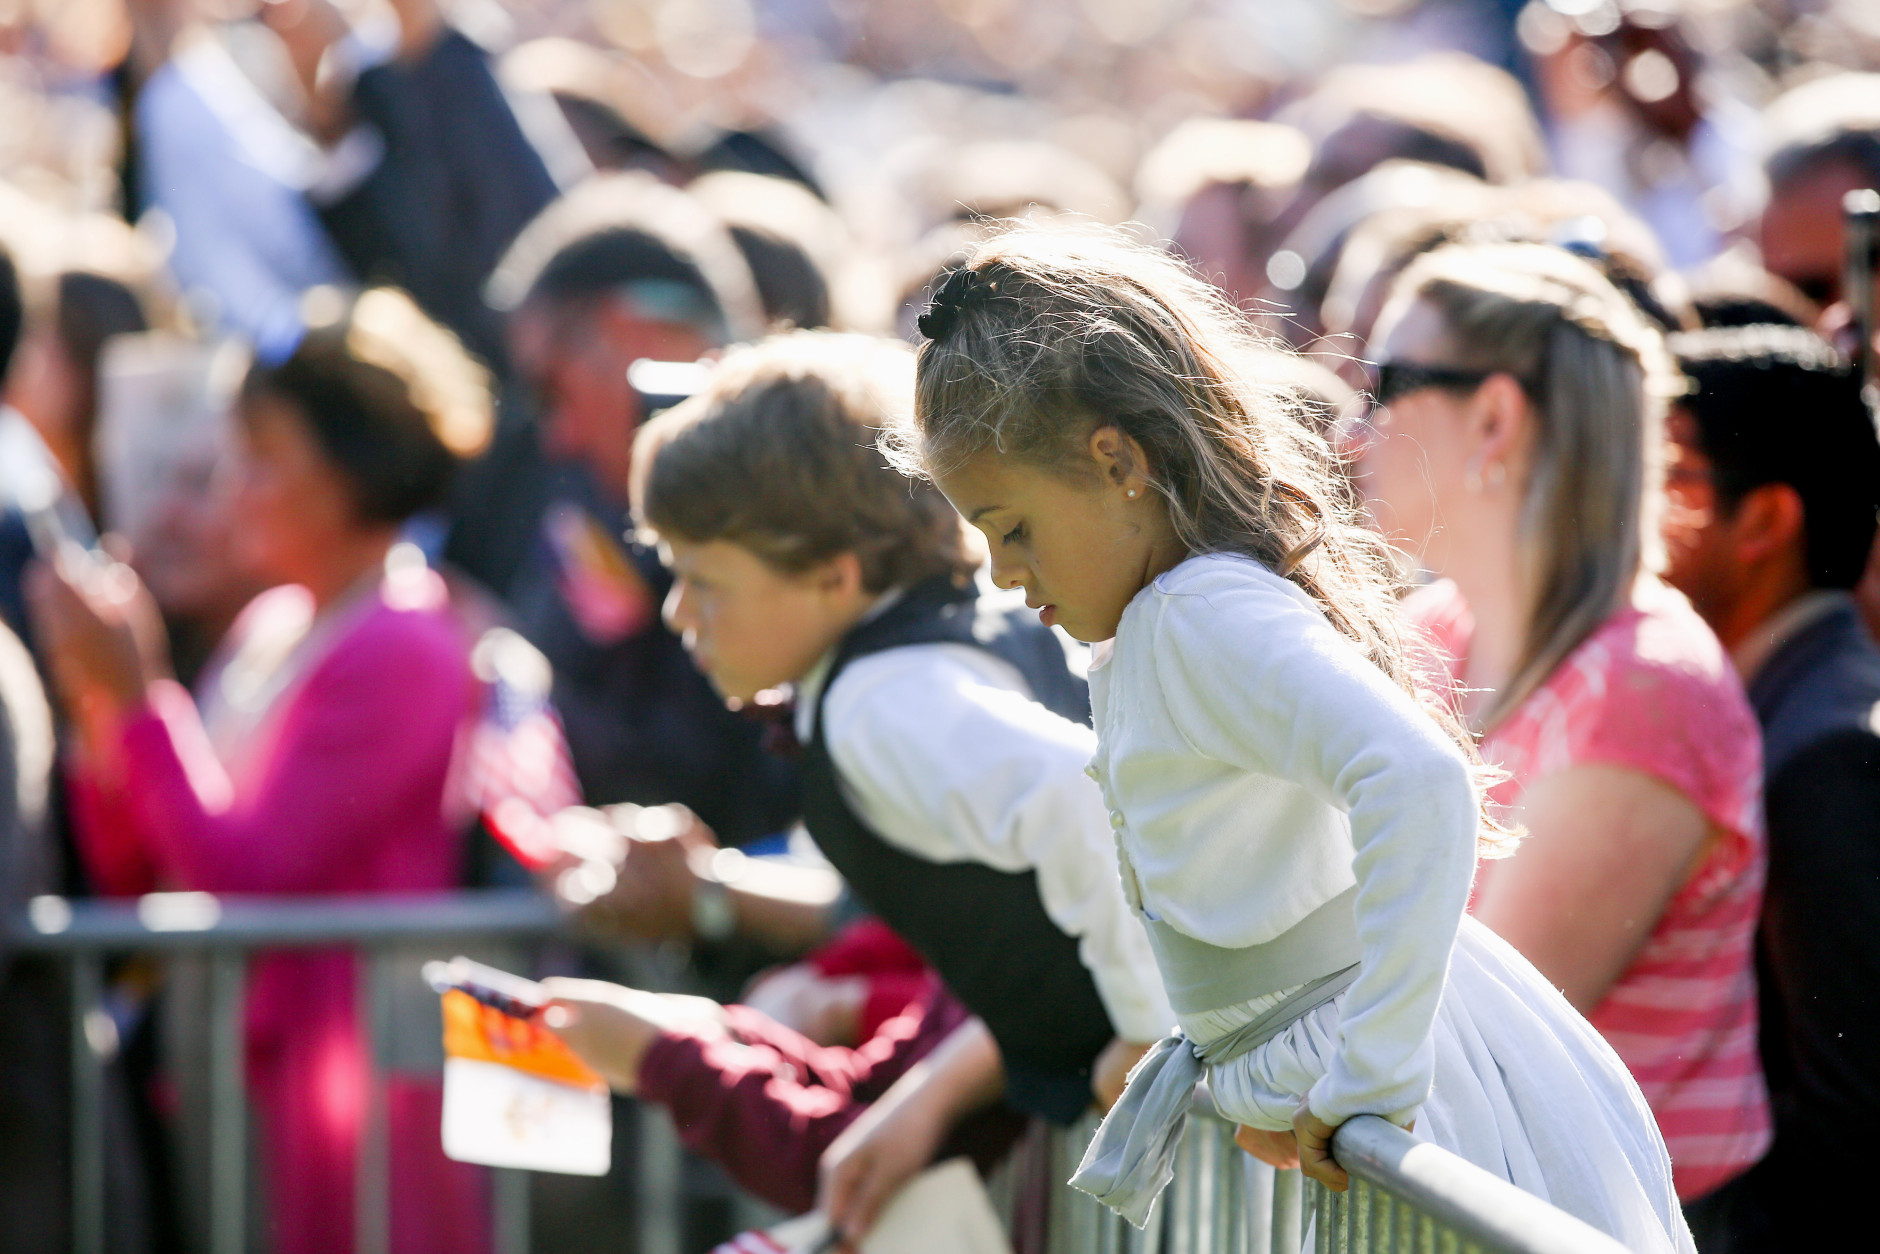 Young members of the audience stand on the South Lawn of the White House in Washington, Wednesday, Sept. 23, 2015, during a state arrival ceremony for the Pope Francis. (AP Photo/Andrew Harnik)